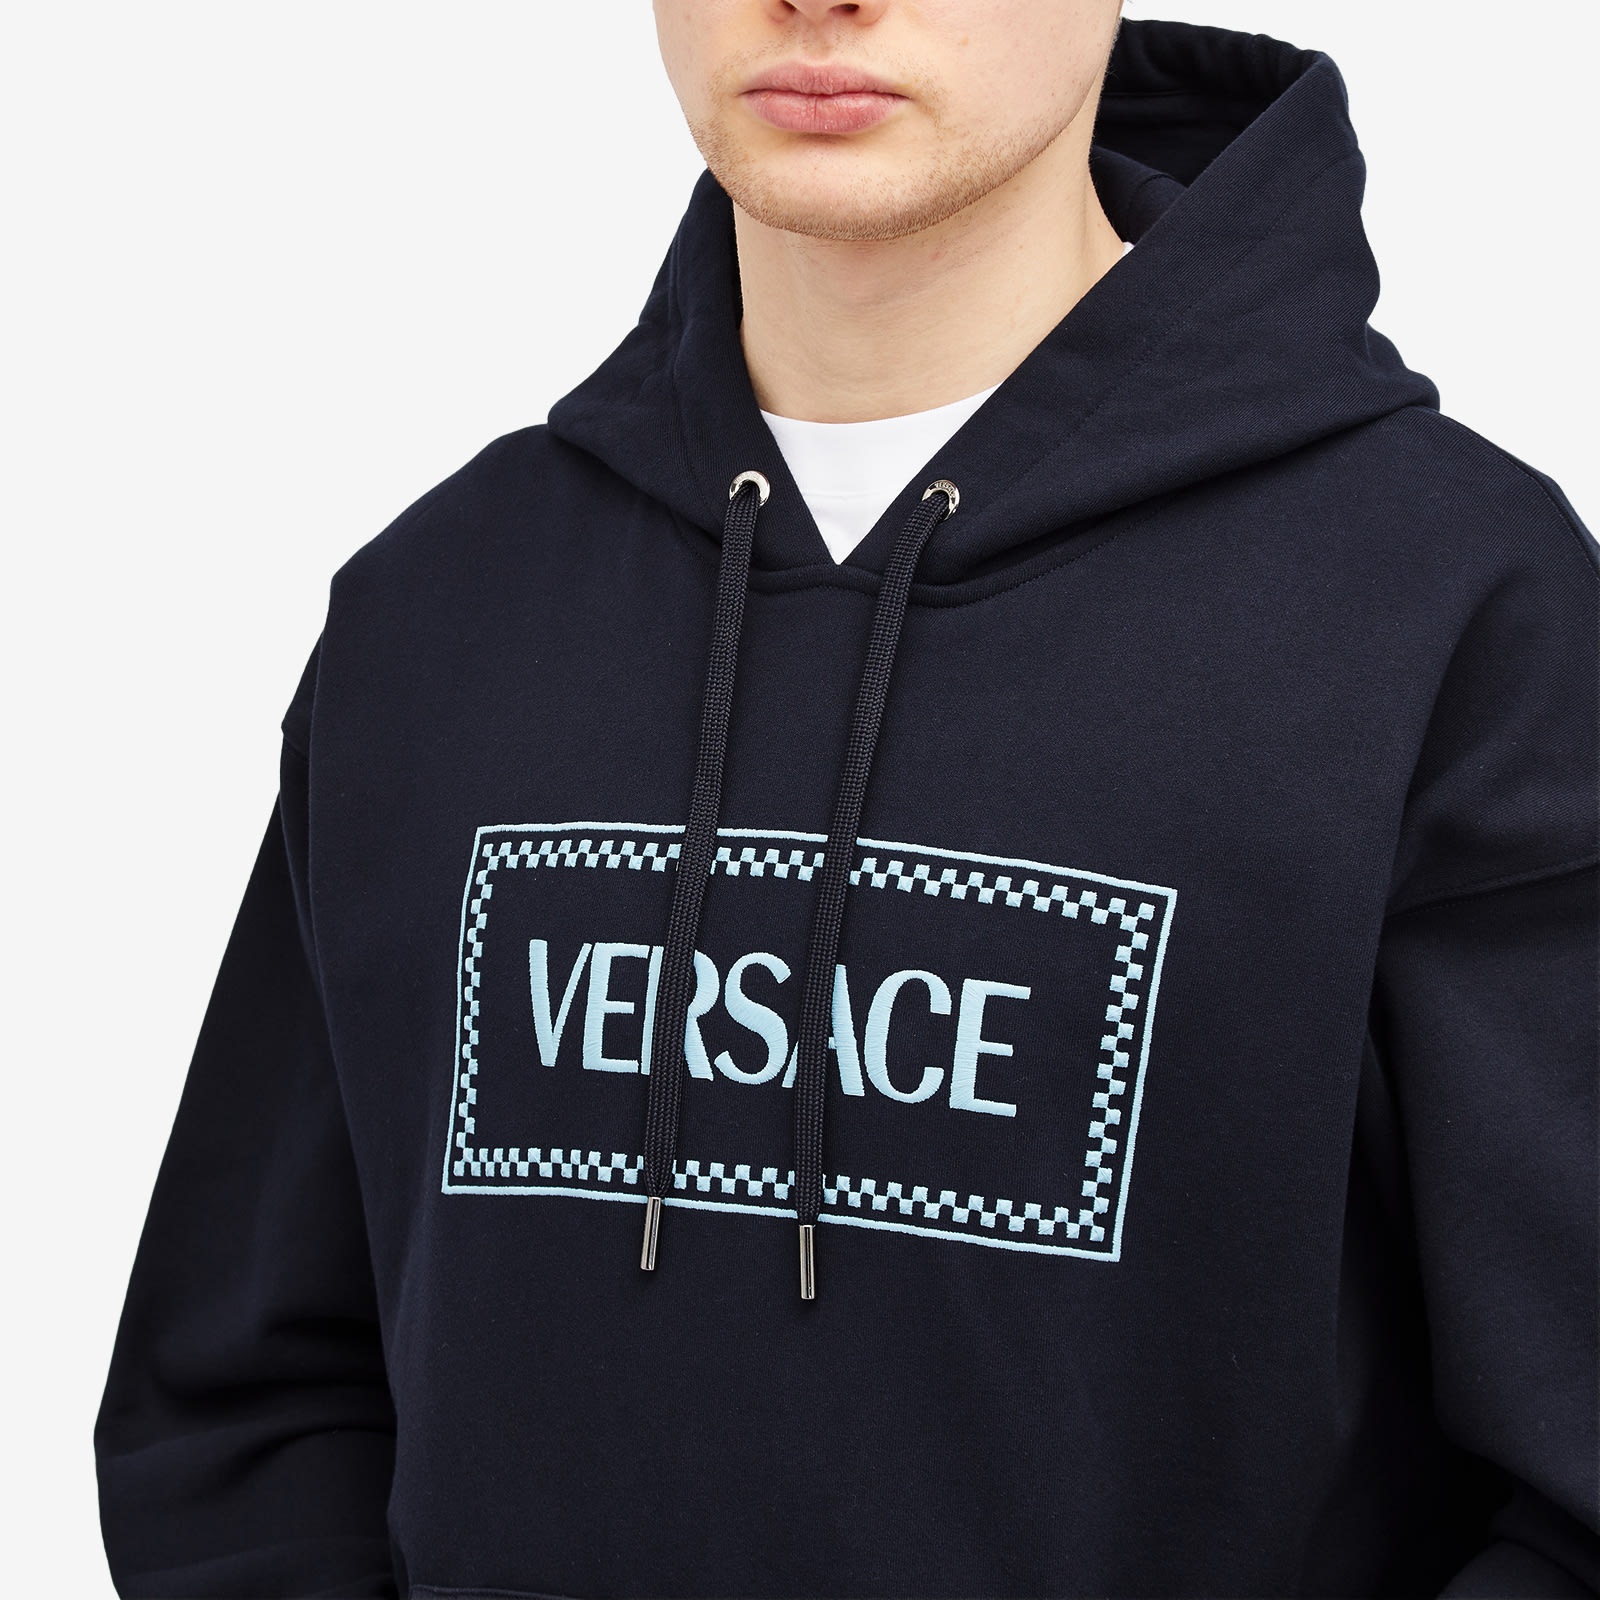 Versace Tiles Embroidered Hoody - 5